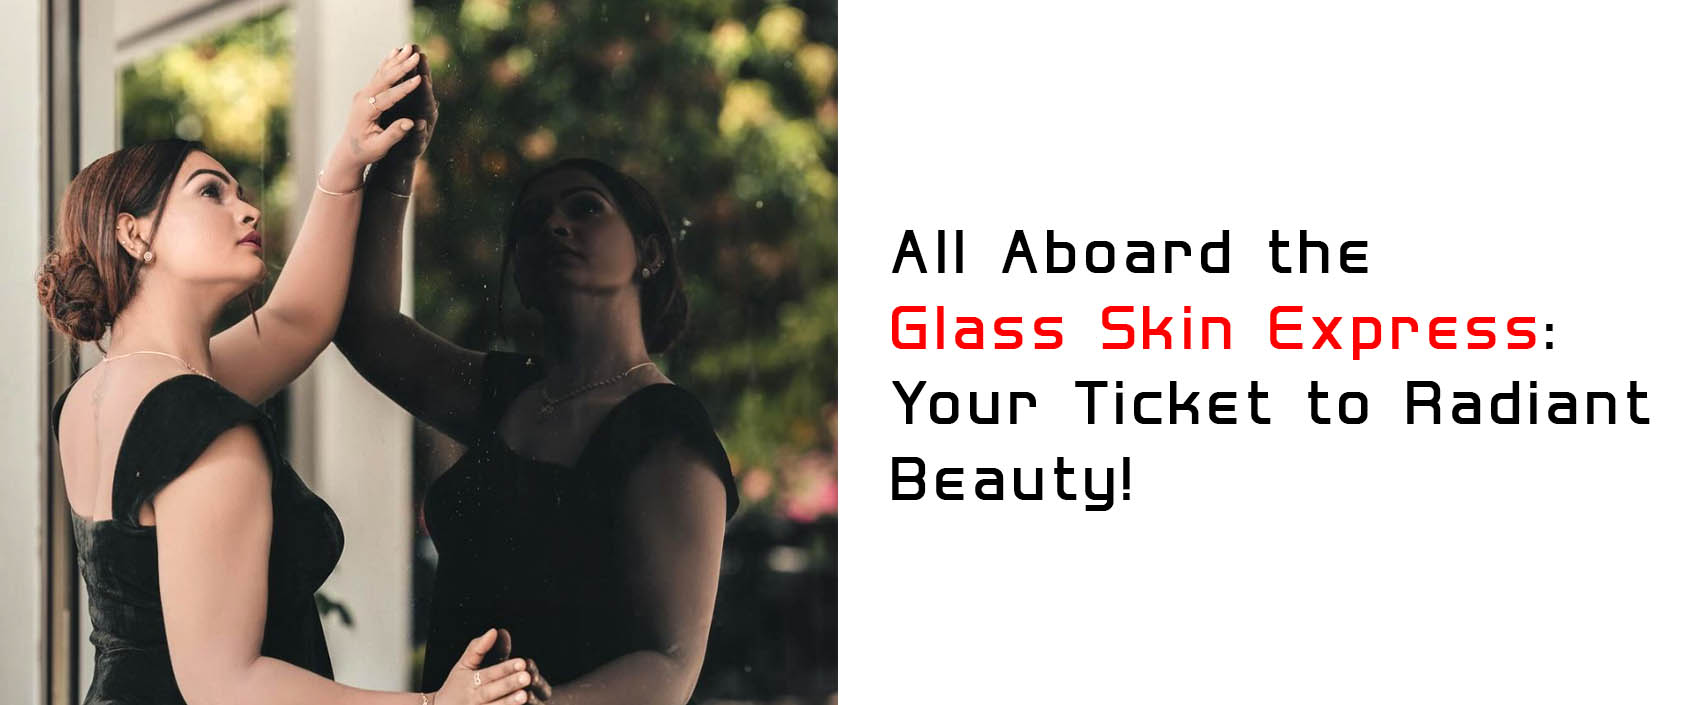 All Aboard the Glass Skin Express: Your Ticket to Radiant Beauty!